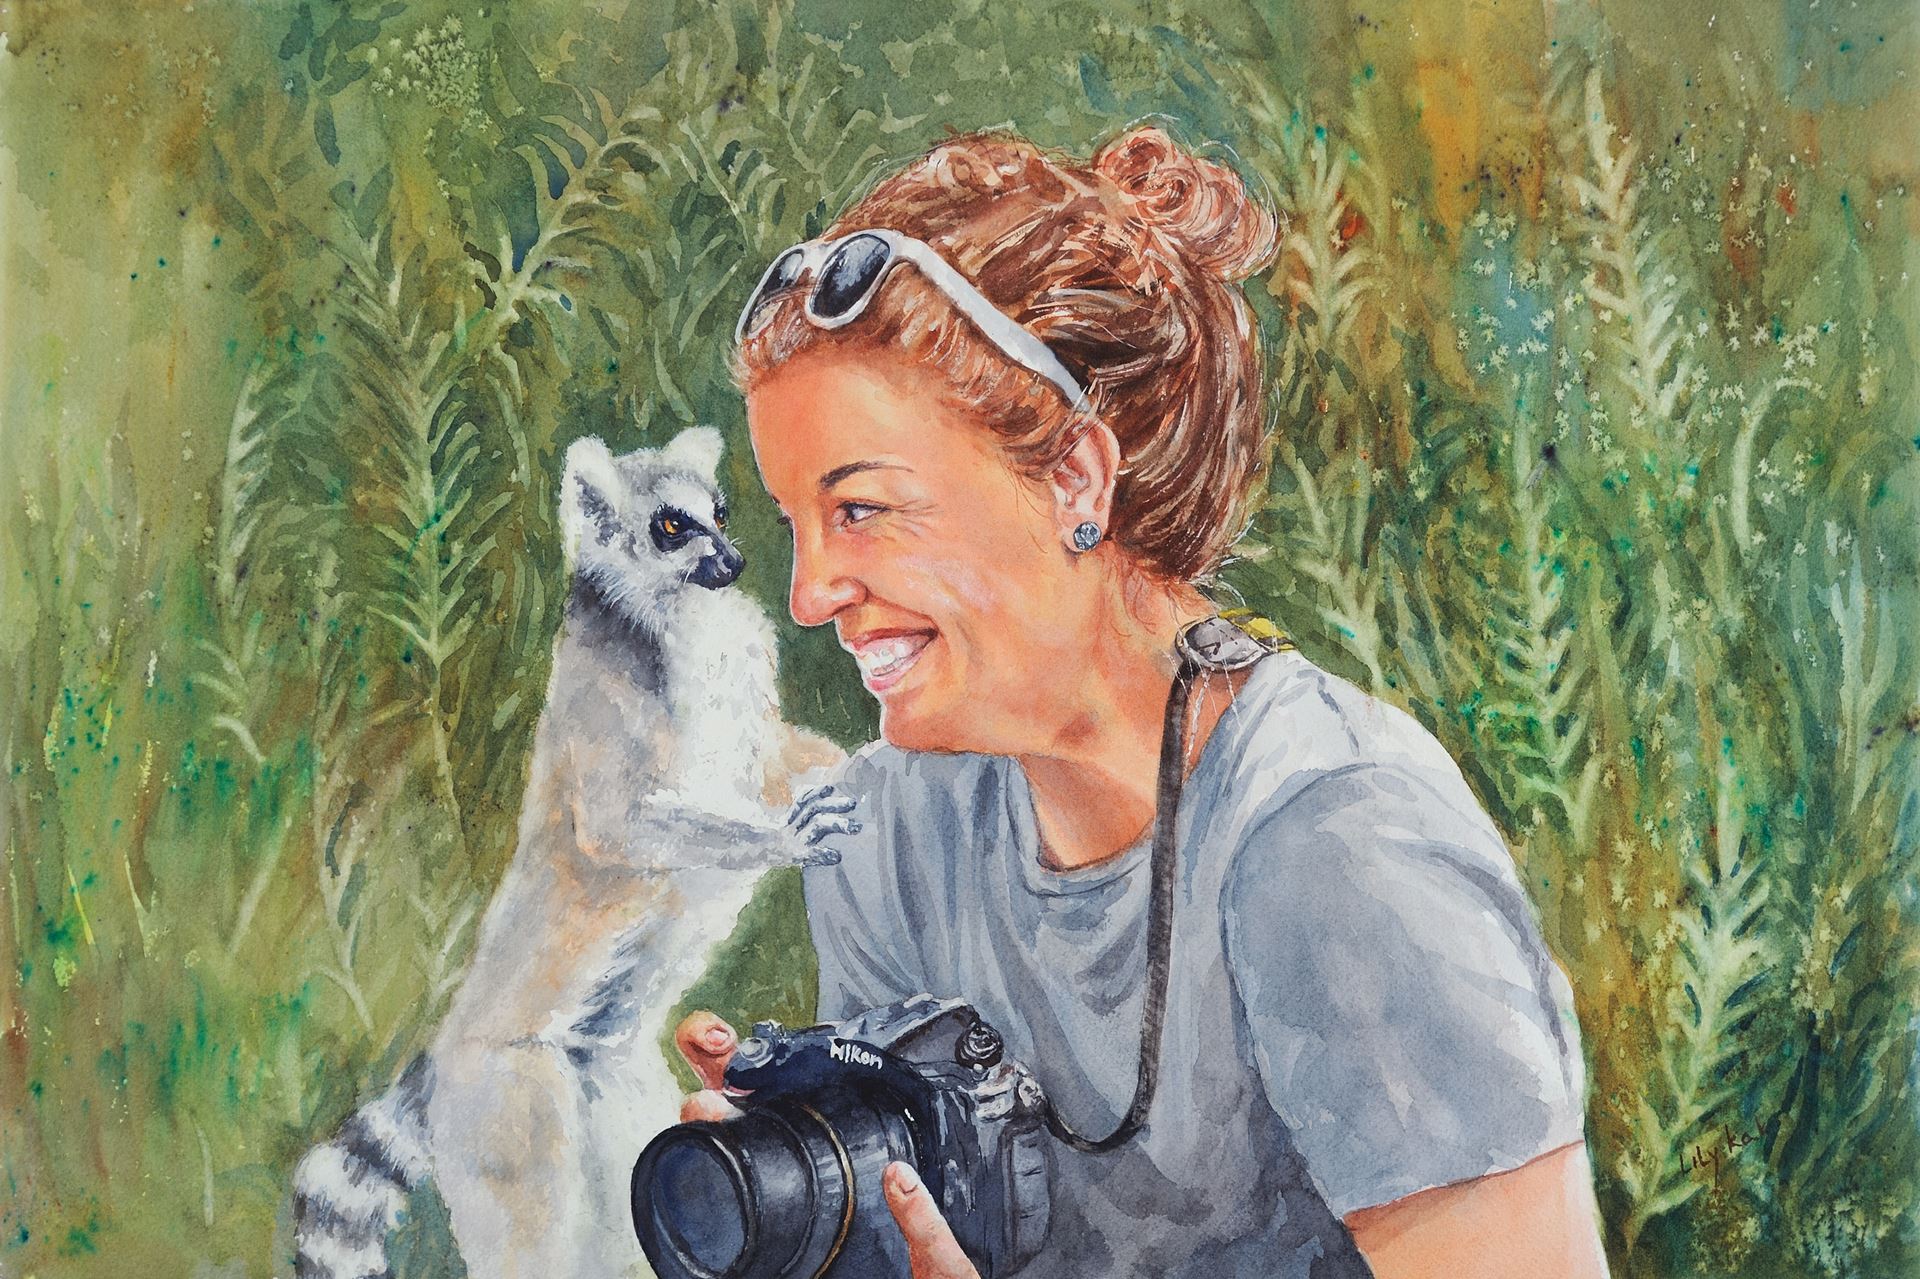 Watermedia painting by L. Kak, a woman with a camera looking into the eyes of a curious lemur that is touching her shoulder